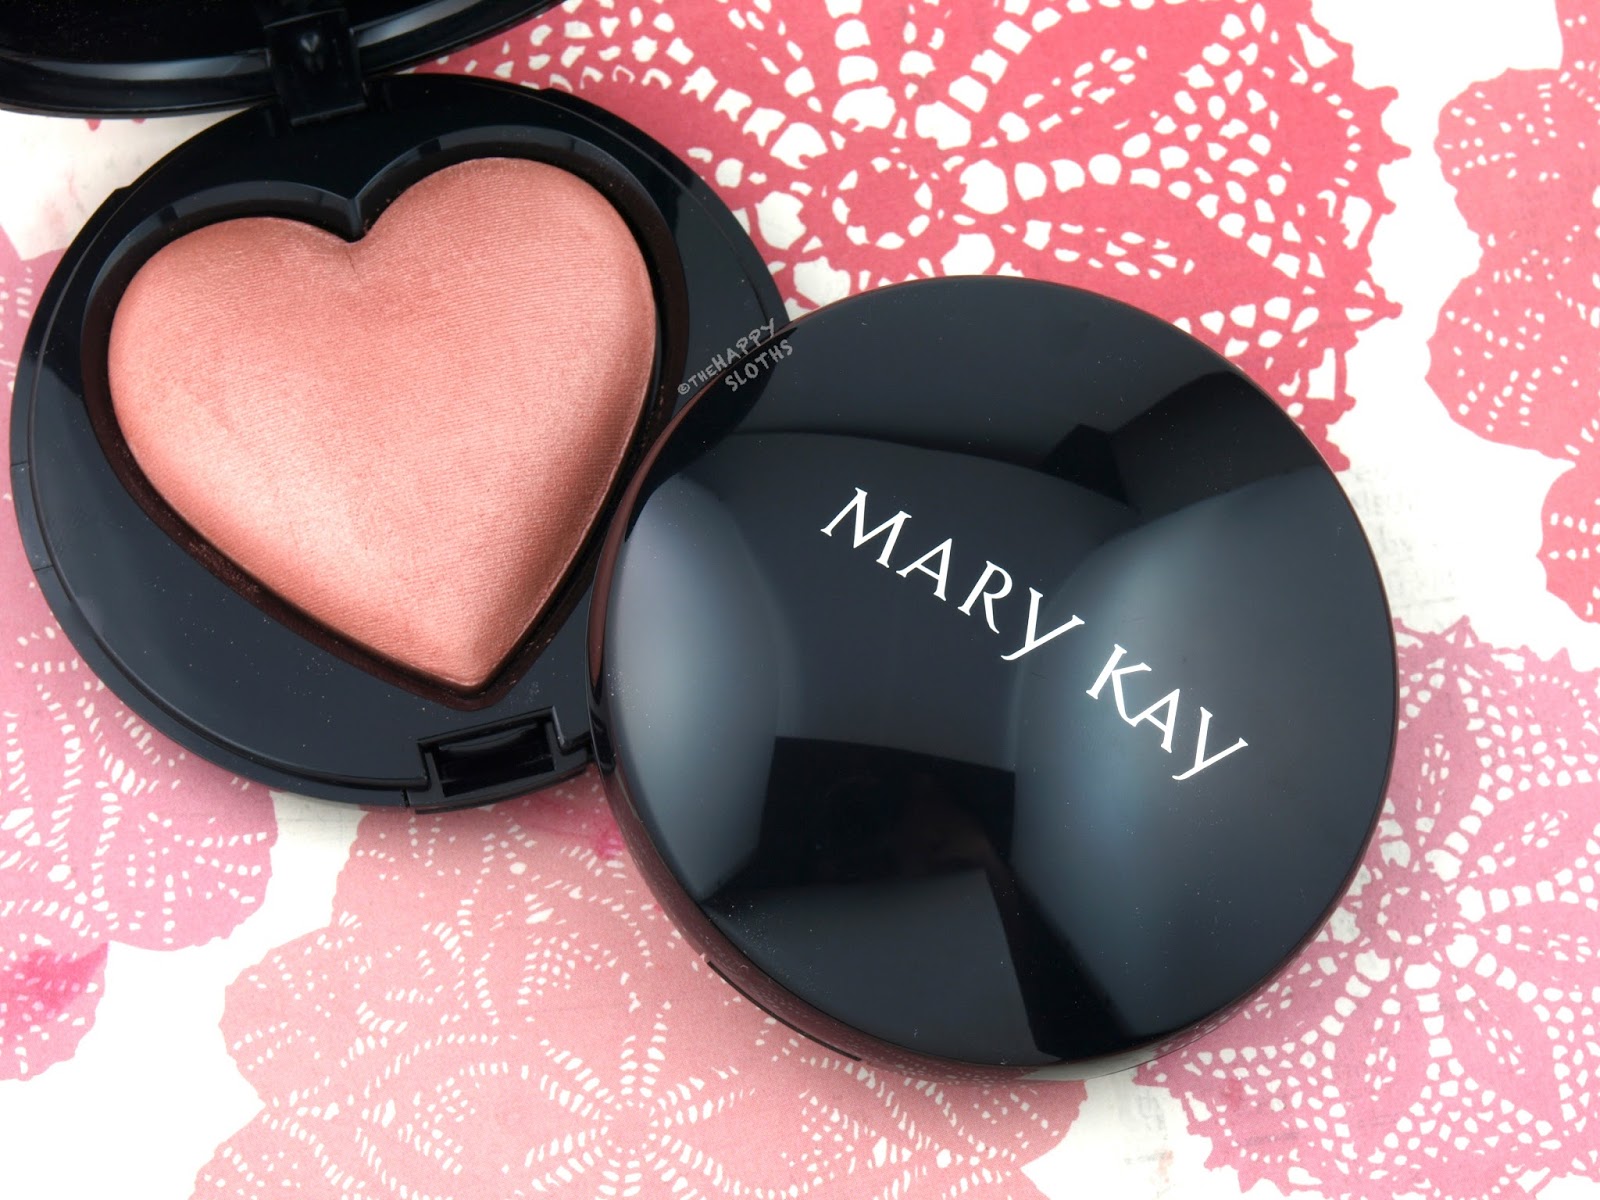 Mary Kay Summer 2017 Baked Cheek Powder: Review and Swatches